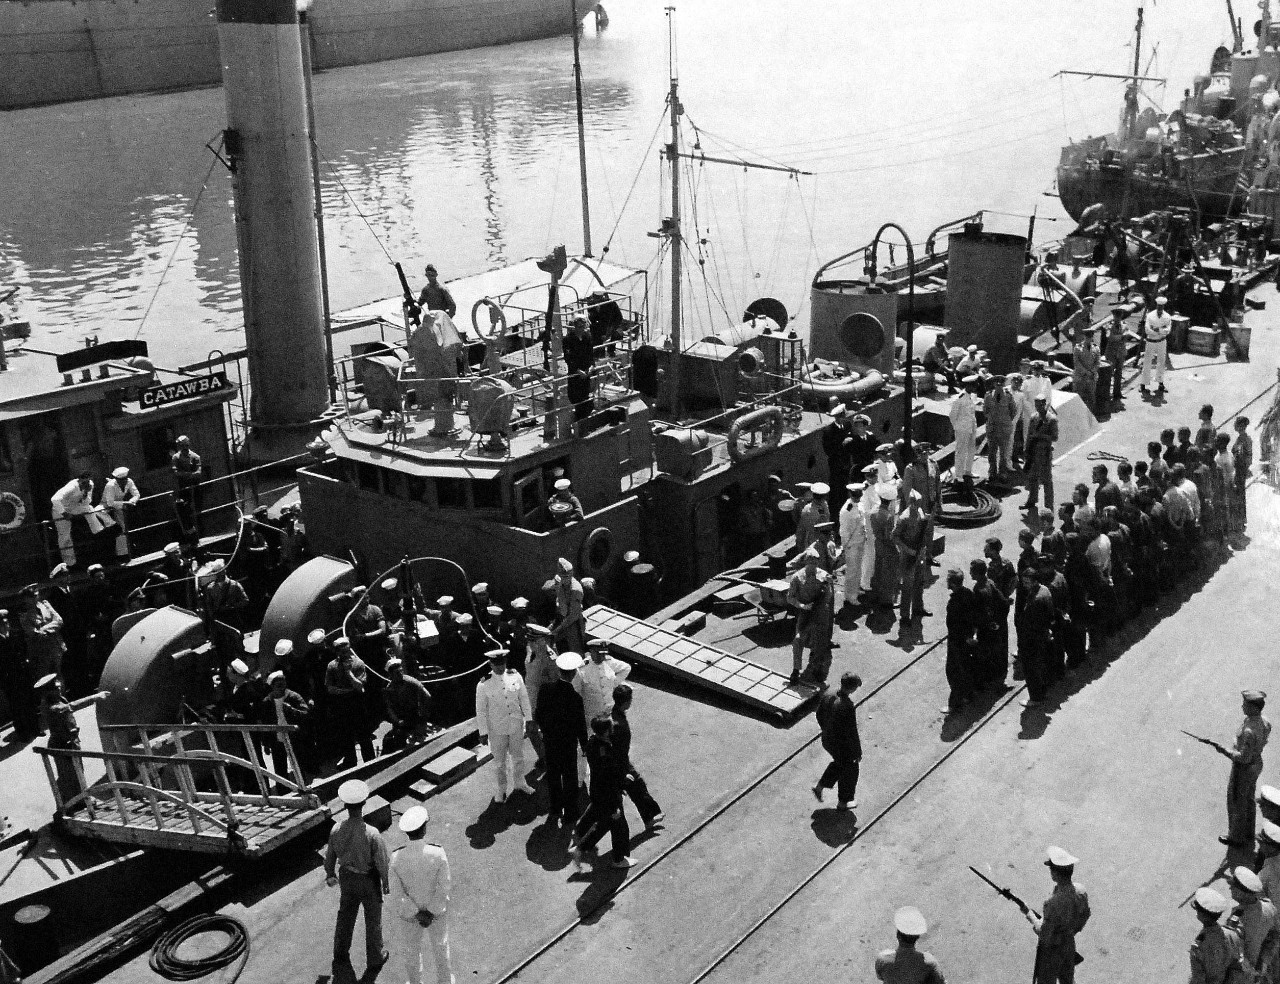 80-G-41302:  German U-boat, U-352, May 1942.    33 German prisoners were brought ashore at the Navy Yard, Charleston, South Carolina, by US Coast Guard cutter Icarus (WPC-110) after sinking of German submarine, U-352, off the Atlantic coast on 9 May 1942.   US Marines, with fixed bayonets stand guard as prisoners are lined up in front of the Coast Guard cutter.  Photograph released 2 May 1943.  Official U.S. Navy Photograph, now in the collections of the National Archives.  (2014/6/12).